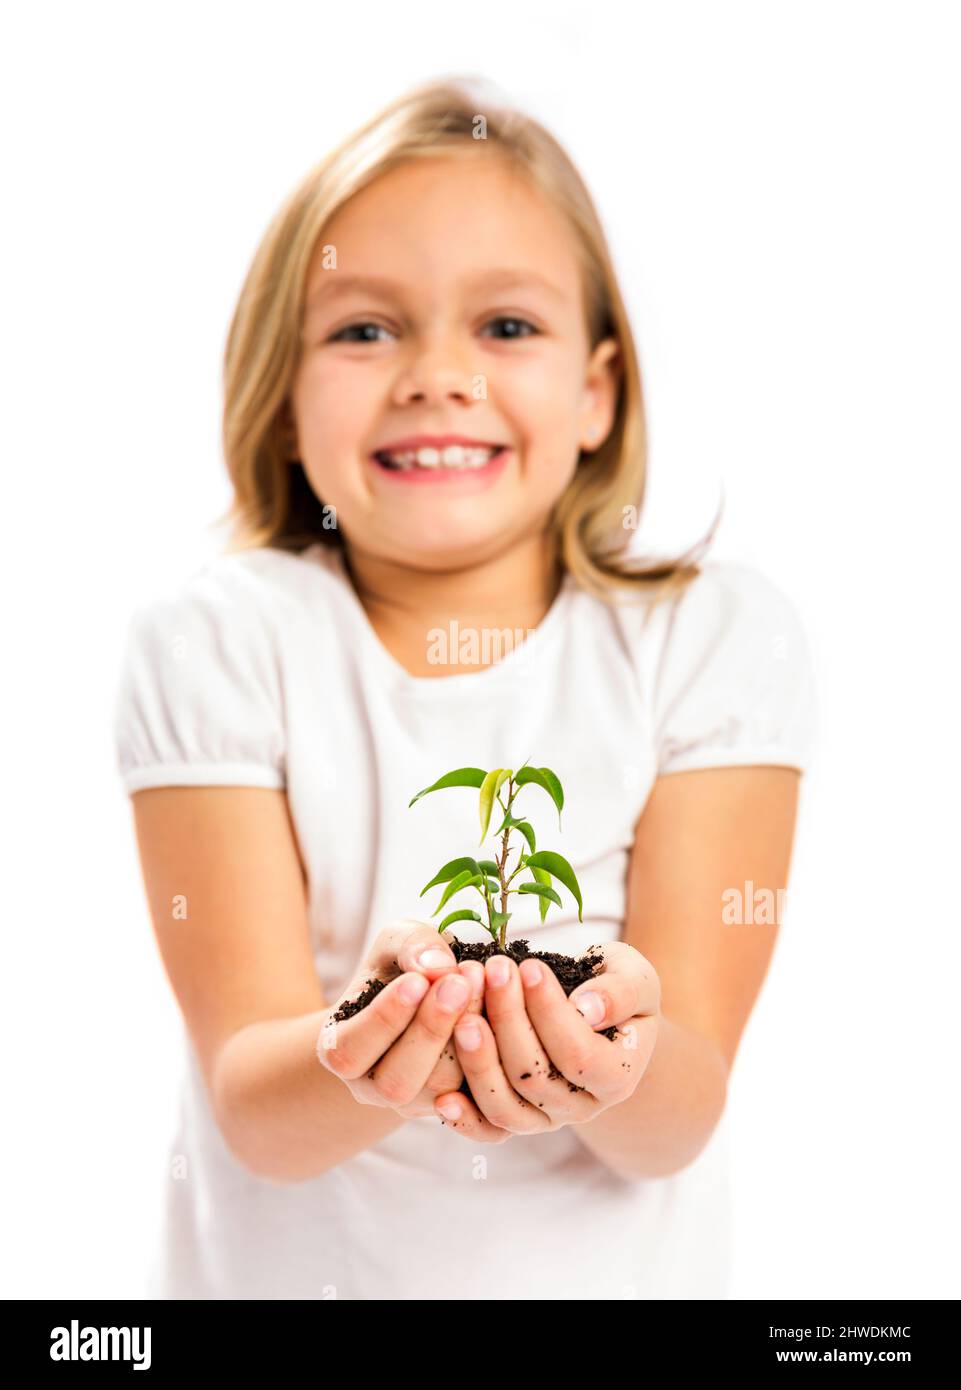 Happy little girl showing a plant on her little hands Stock Photo